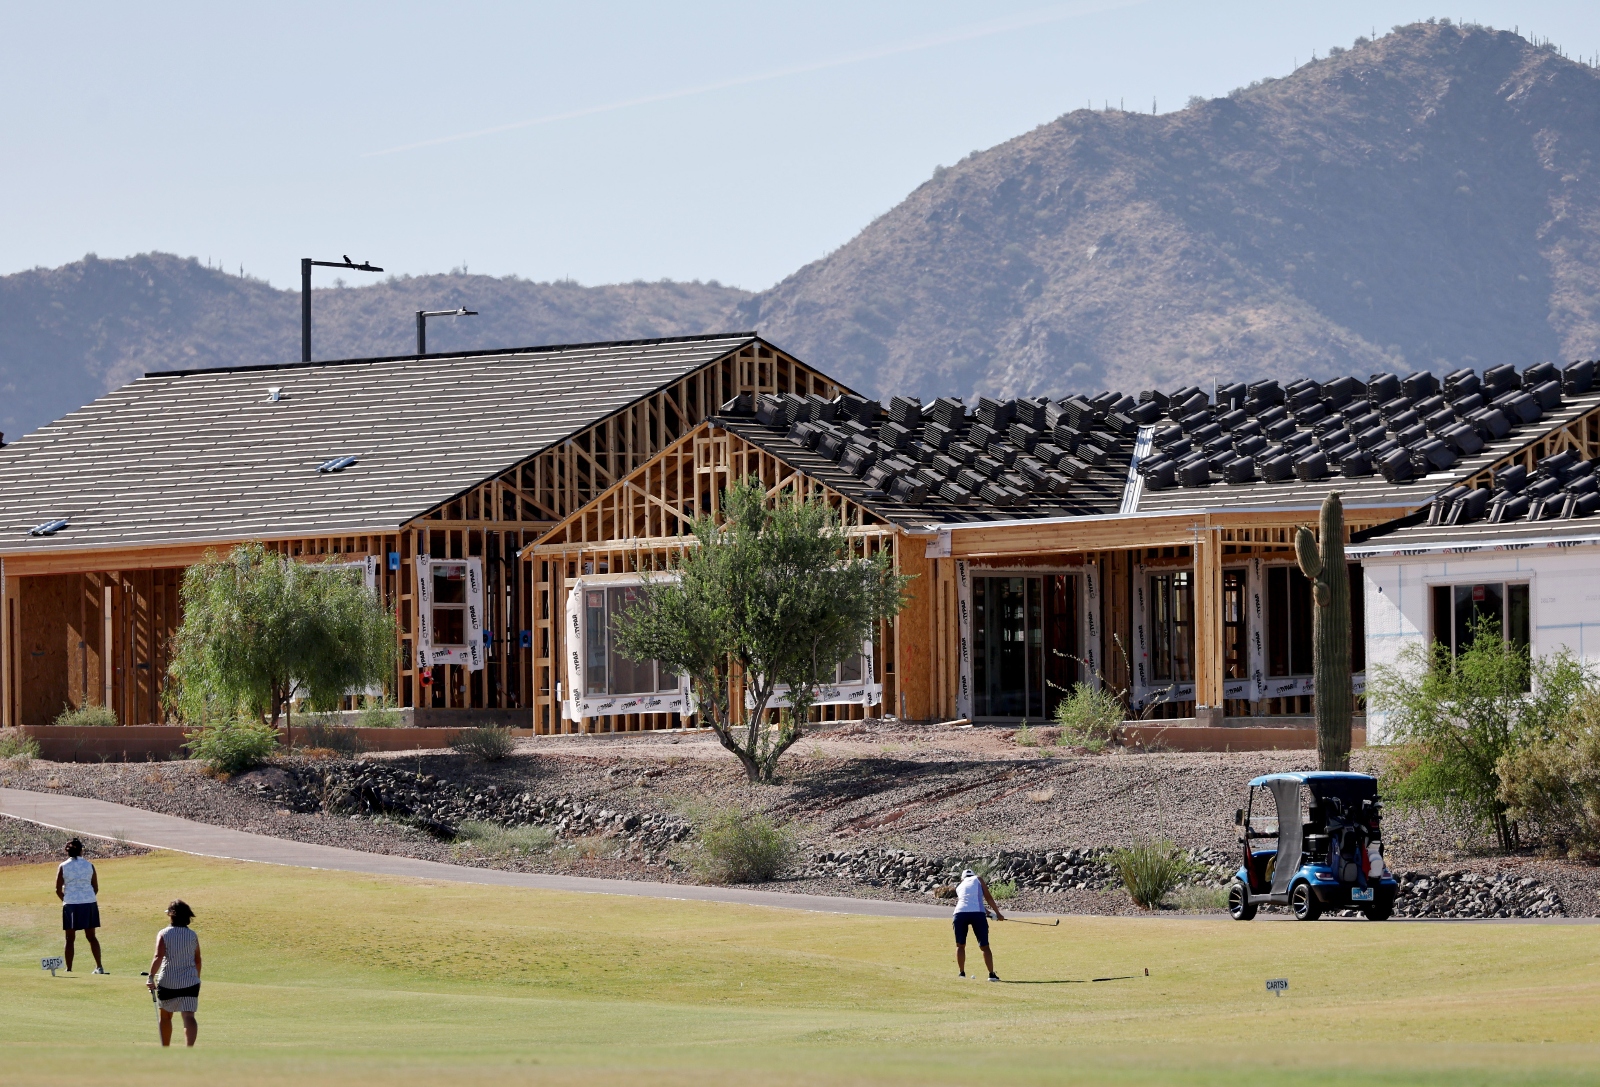 A man golfs in front of a house under construction in front of a mountain.